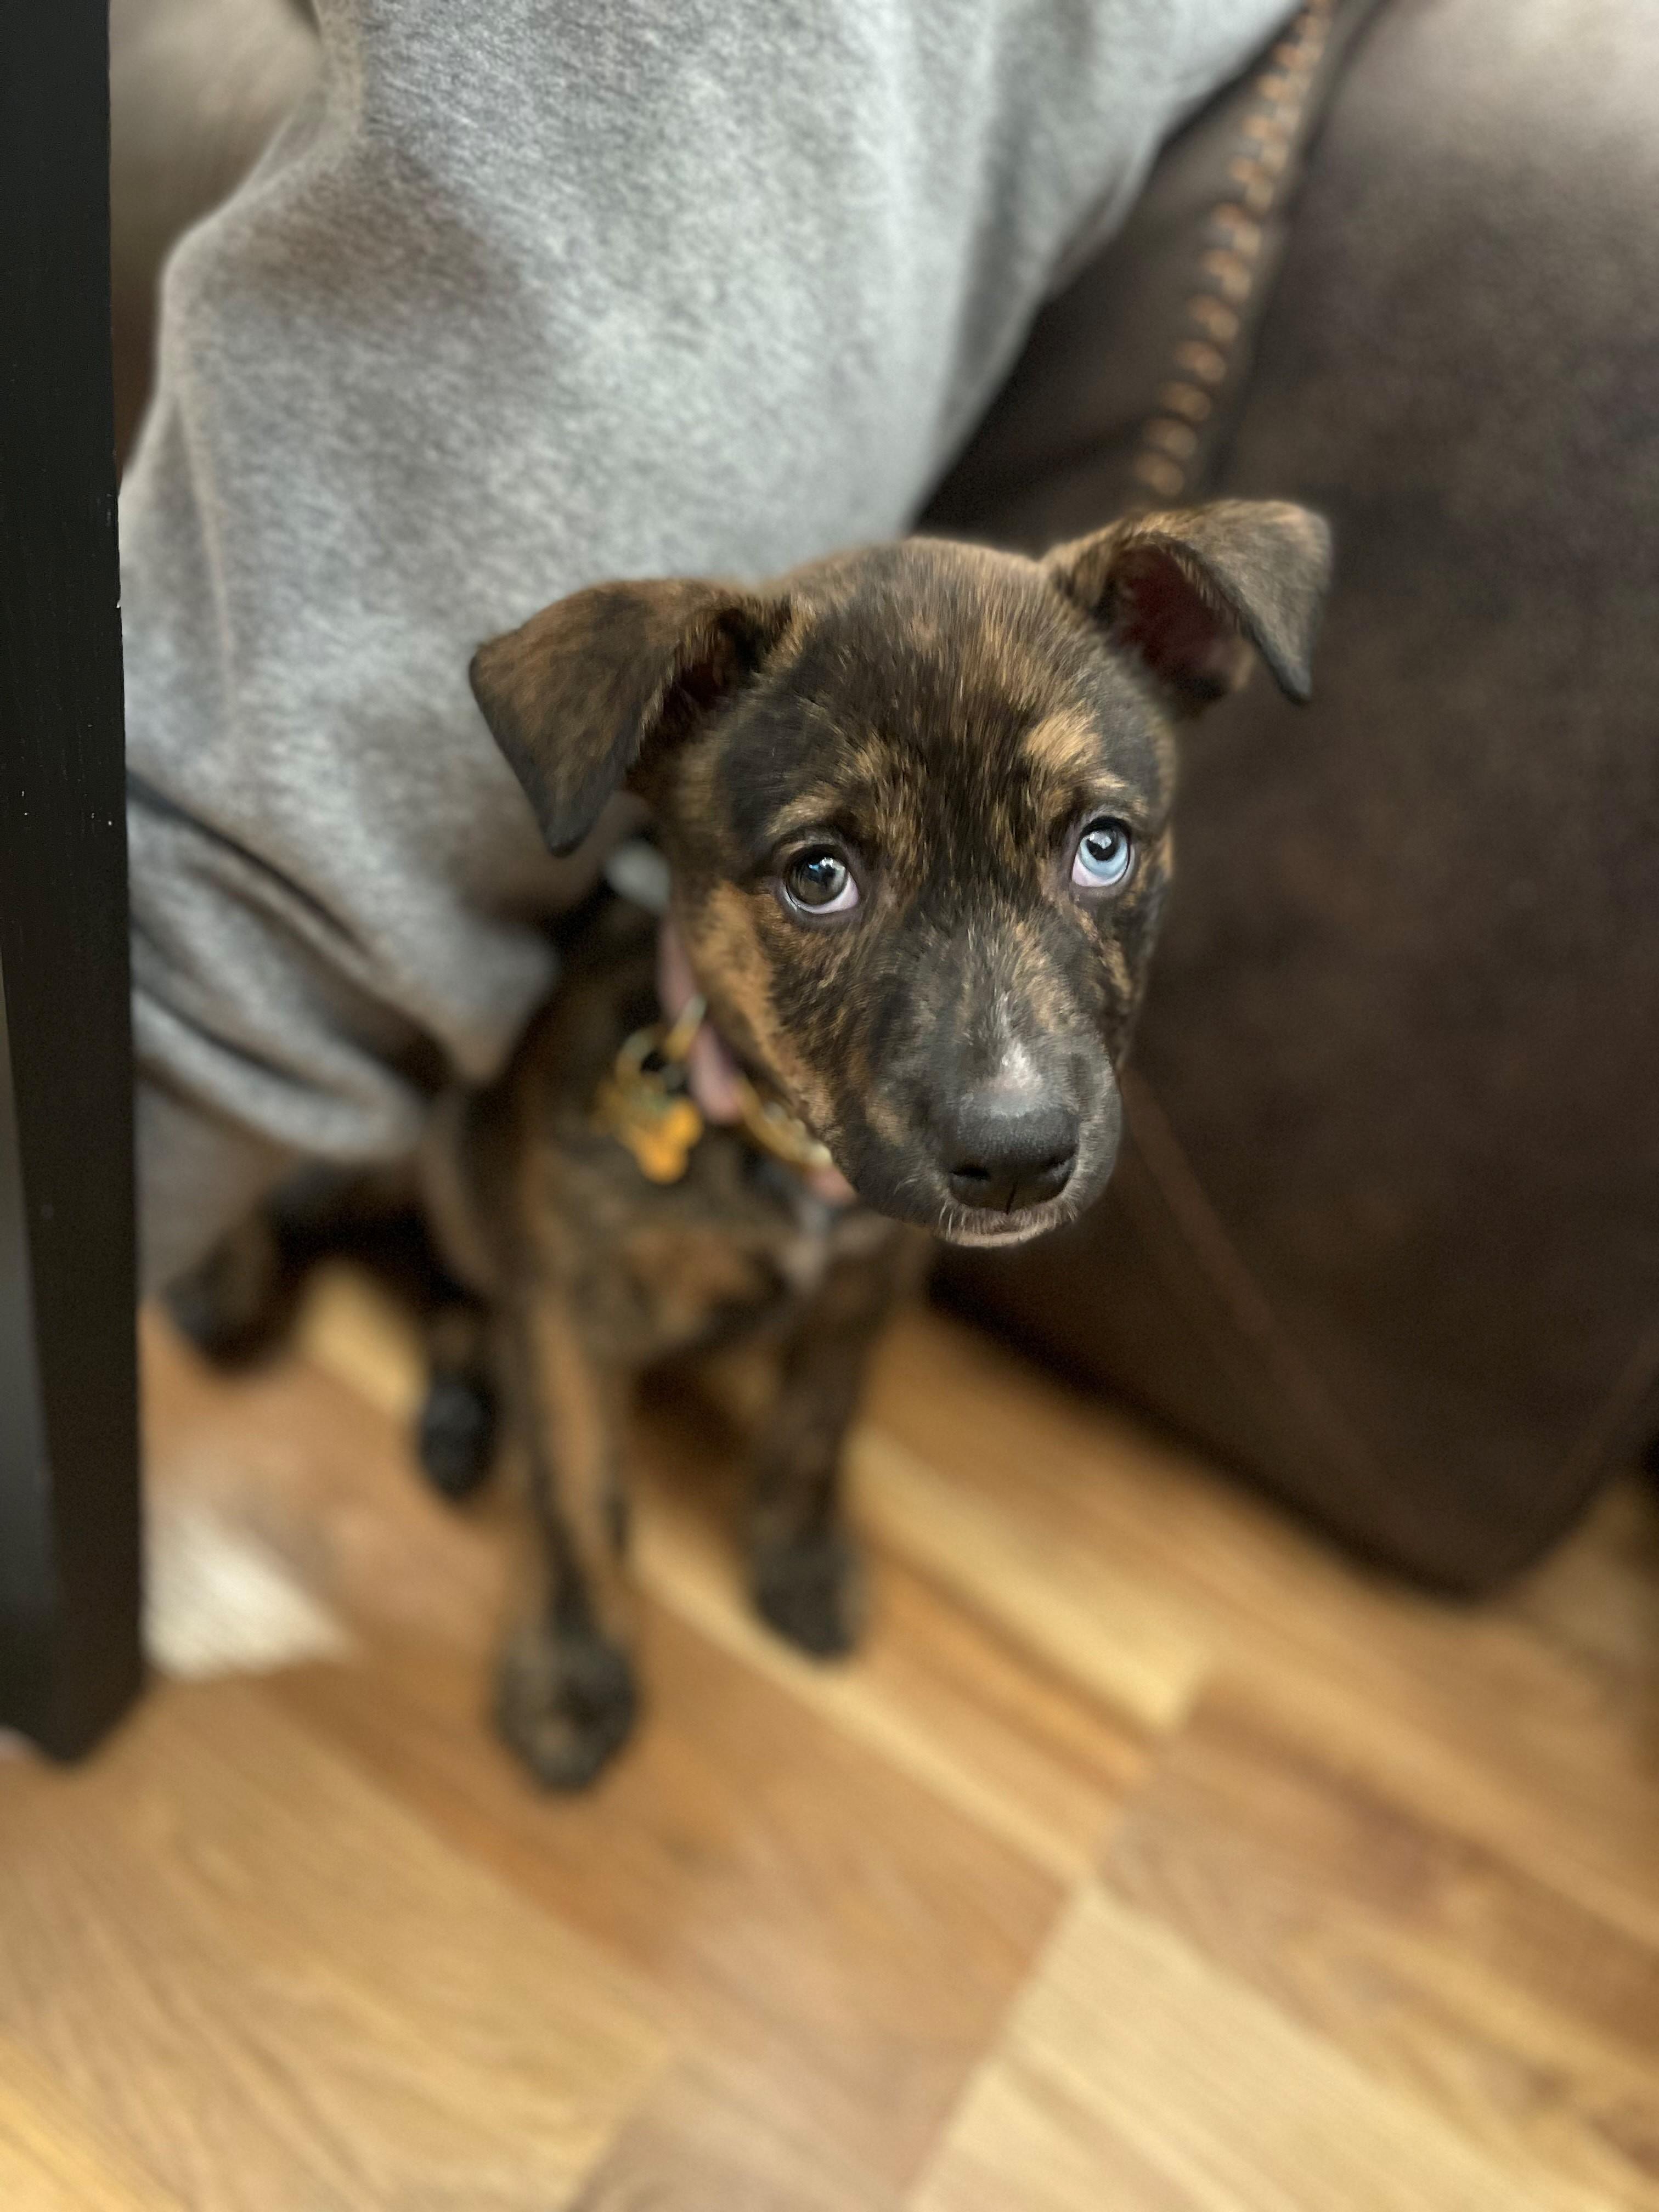 A brown brindle puppy looks at the camera. It has mismatched eyes: one blue and one brown.